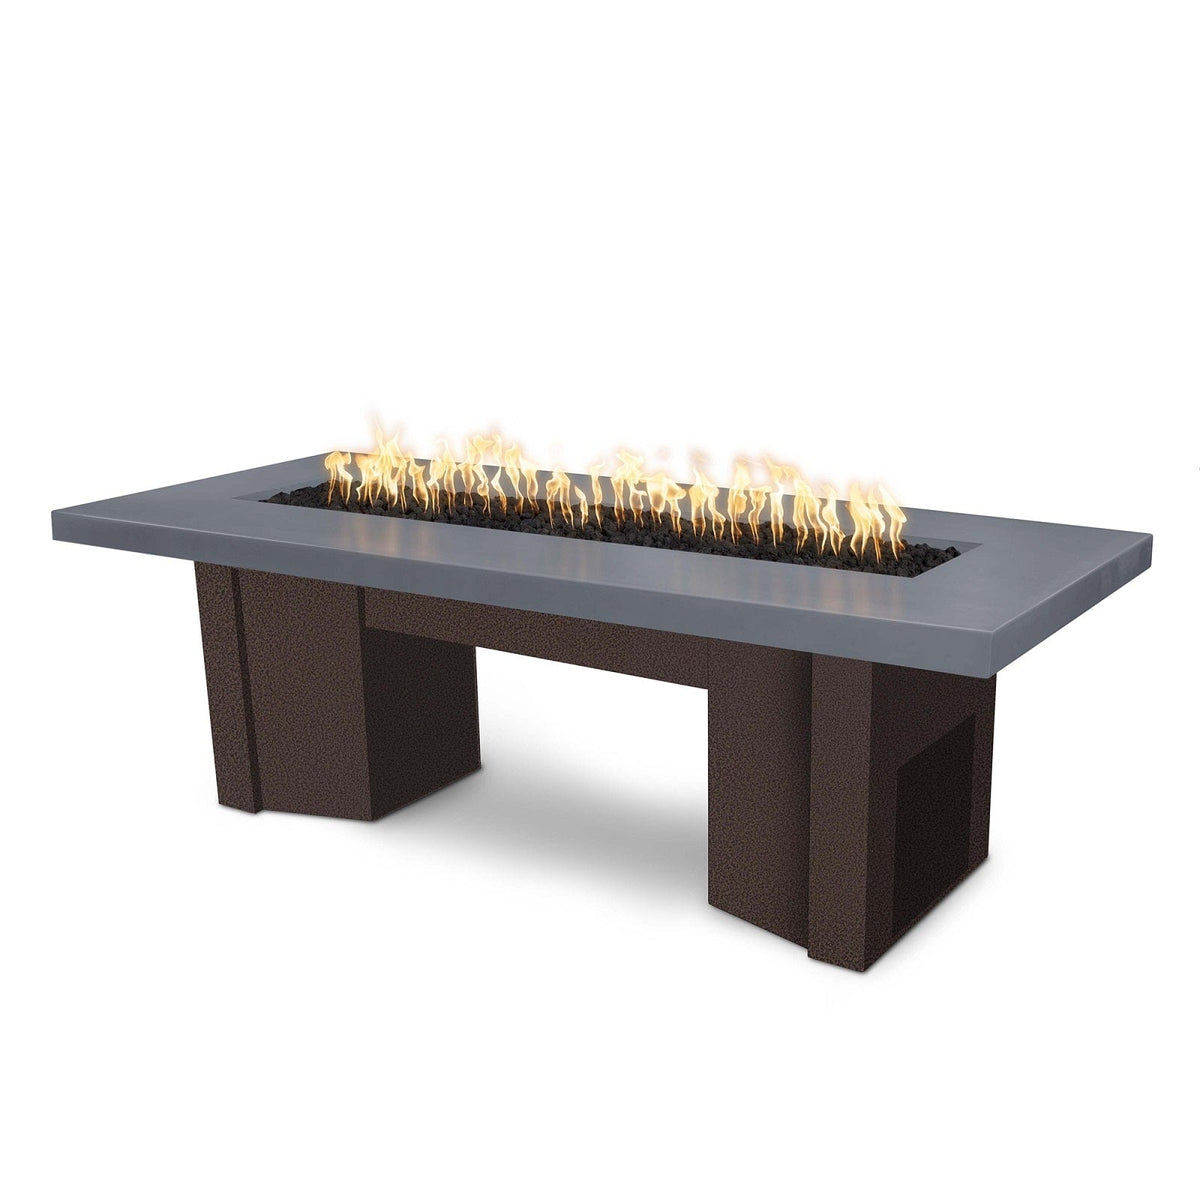 The Outdoor Plus Fire Features Gray (-GRY) / Copper Vein Powder Coated Steel (-CPV) The Outdoor Plus 60&quot; Alameda Fire Table Smooth Concrete in Liquid Propane - Flame Sense System with Push Button Spark Igniter / OPT-ALMGFRC60FSEN-LP